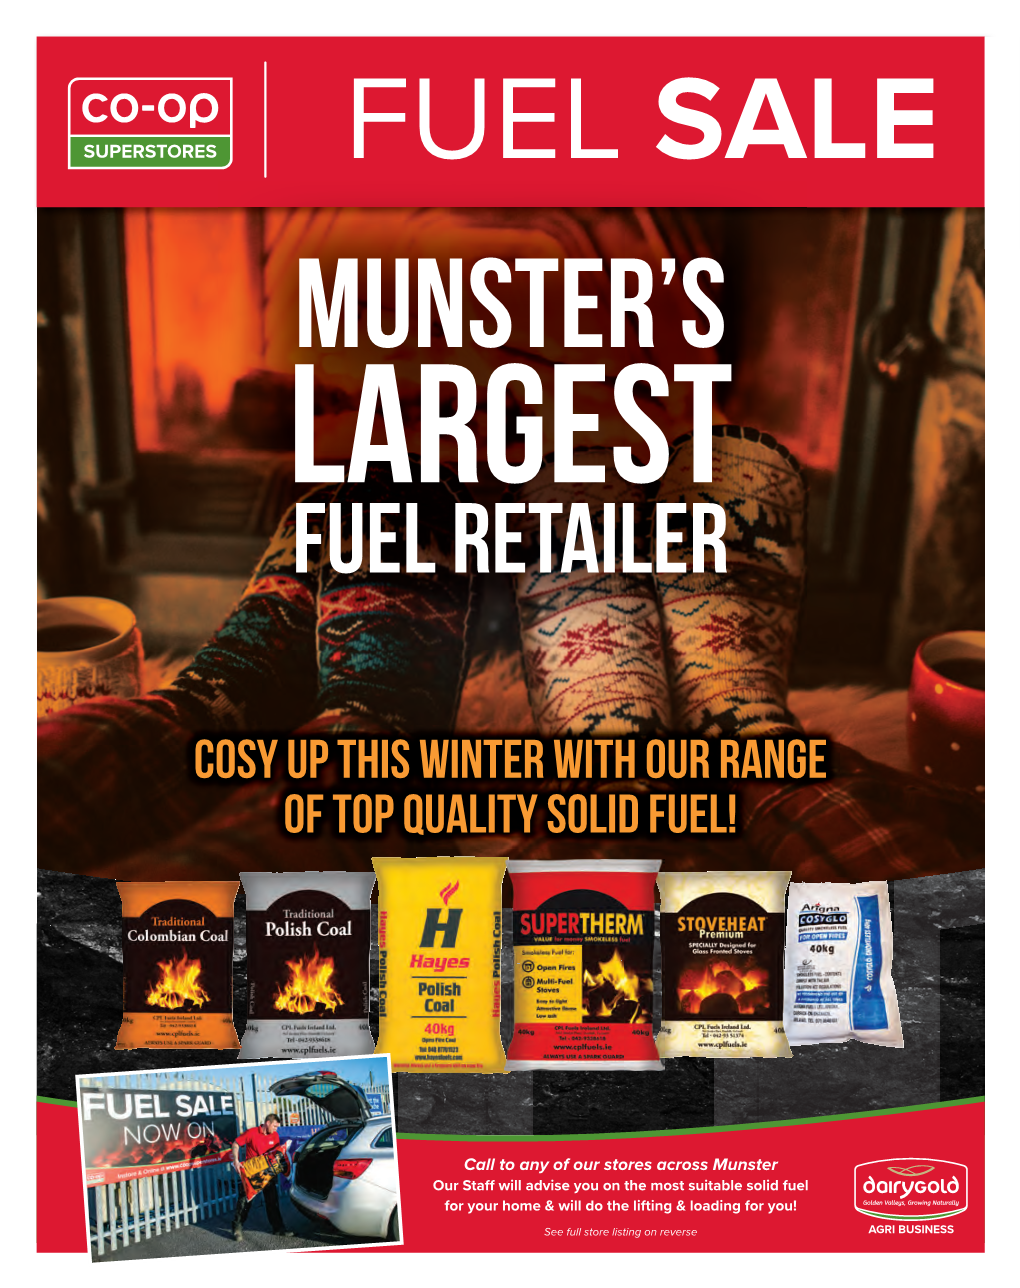 Cosy up This Winter with Our Range of Top Quality Solid Fuel!